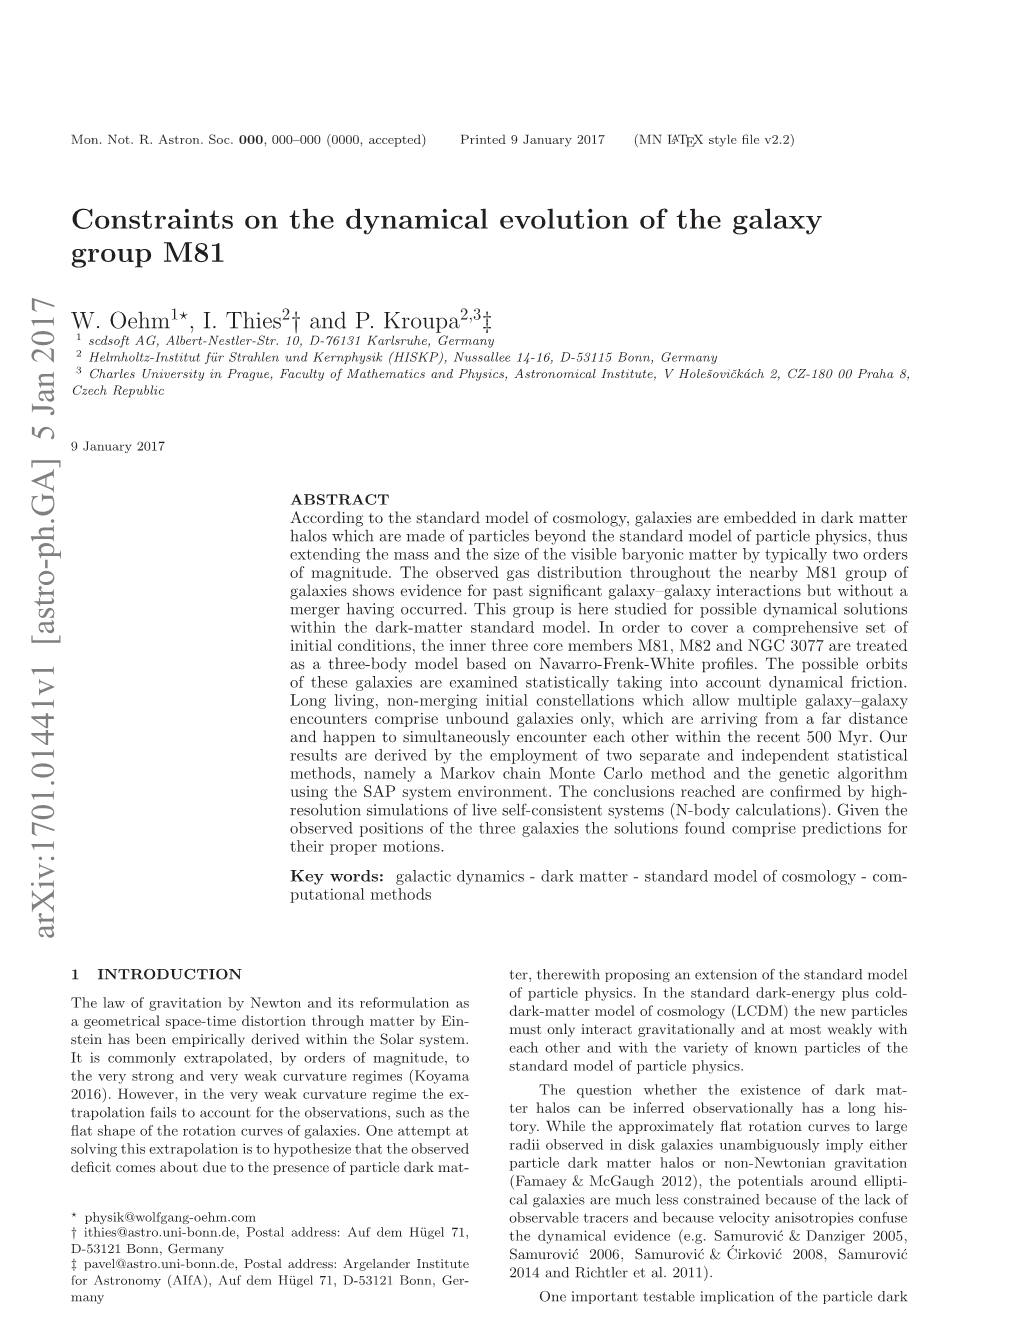 Constraints on the Dynamical Evolution of the Galaxy Group M81 3